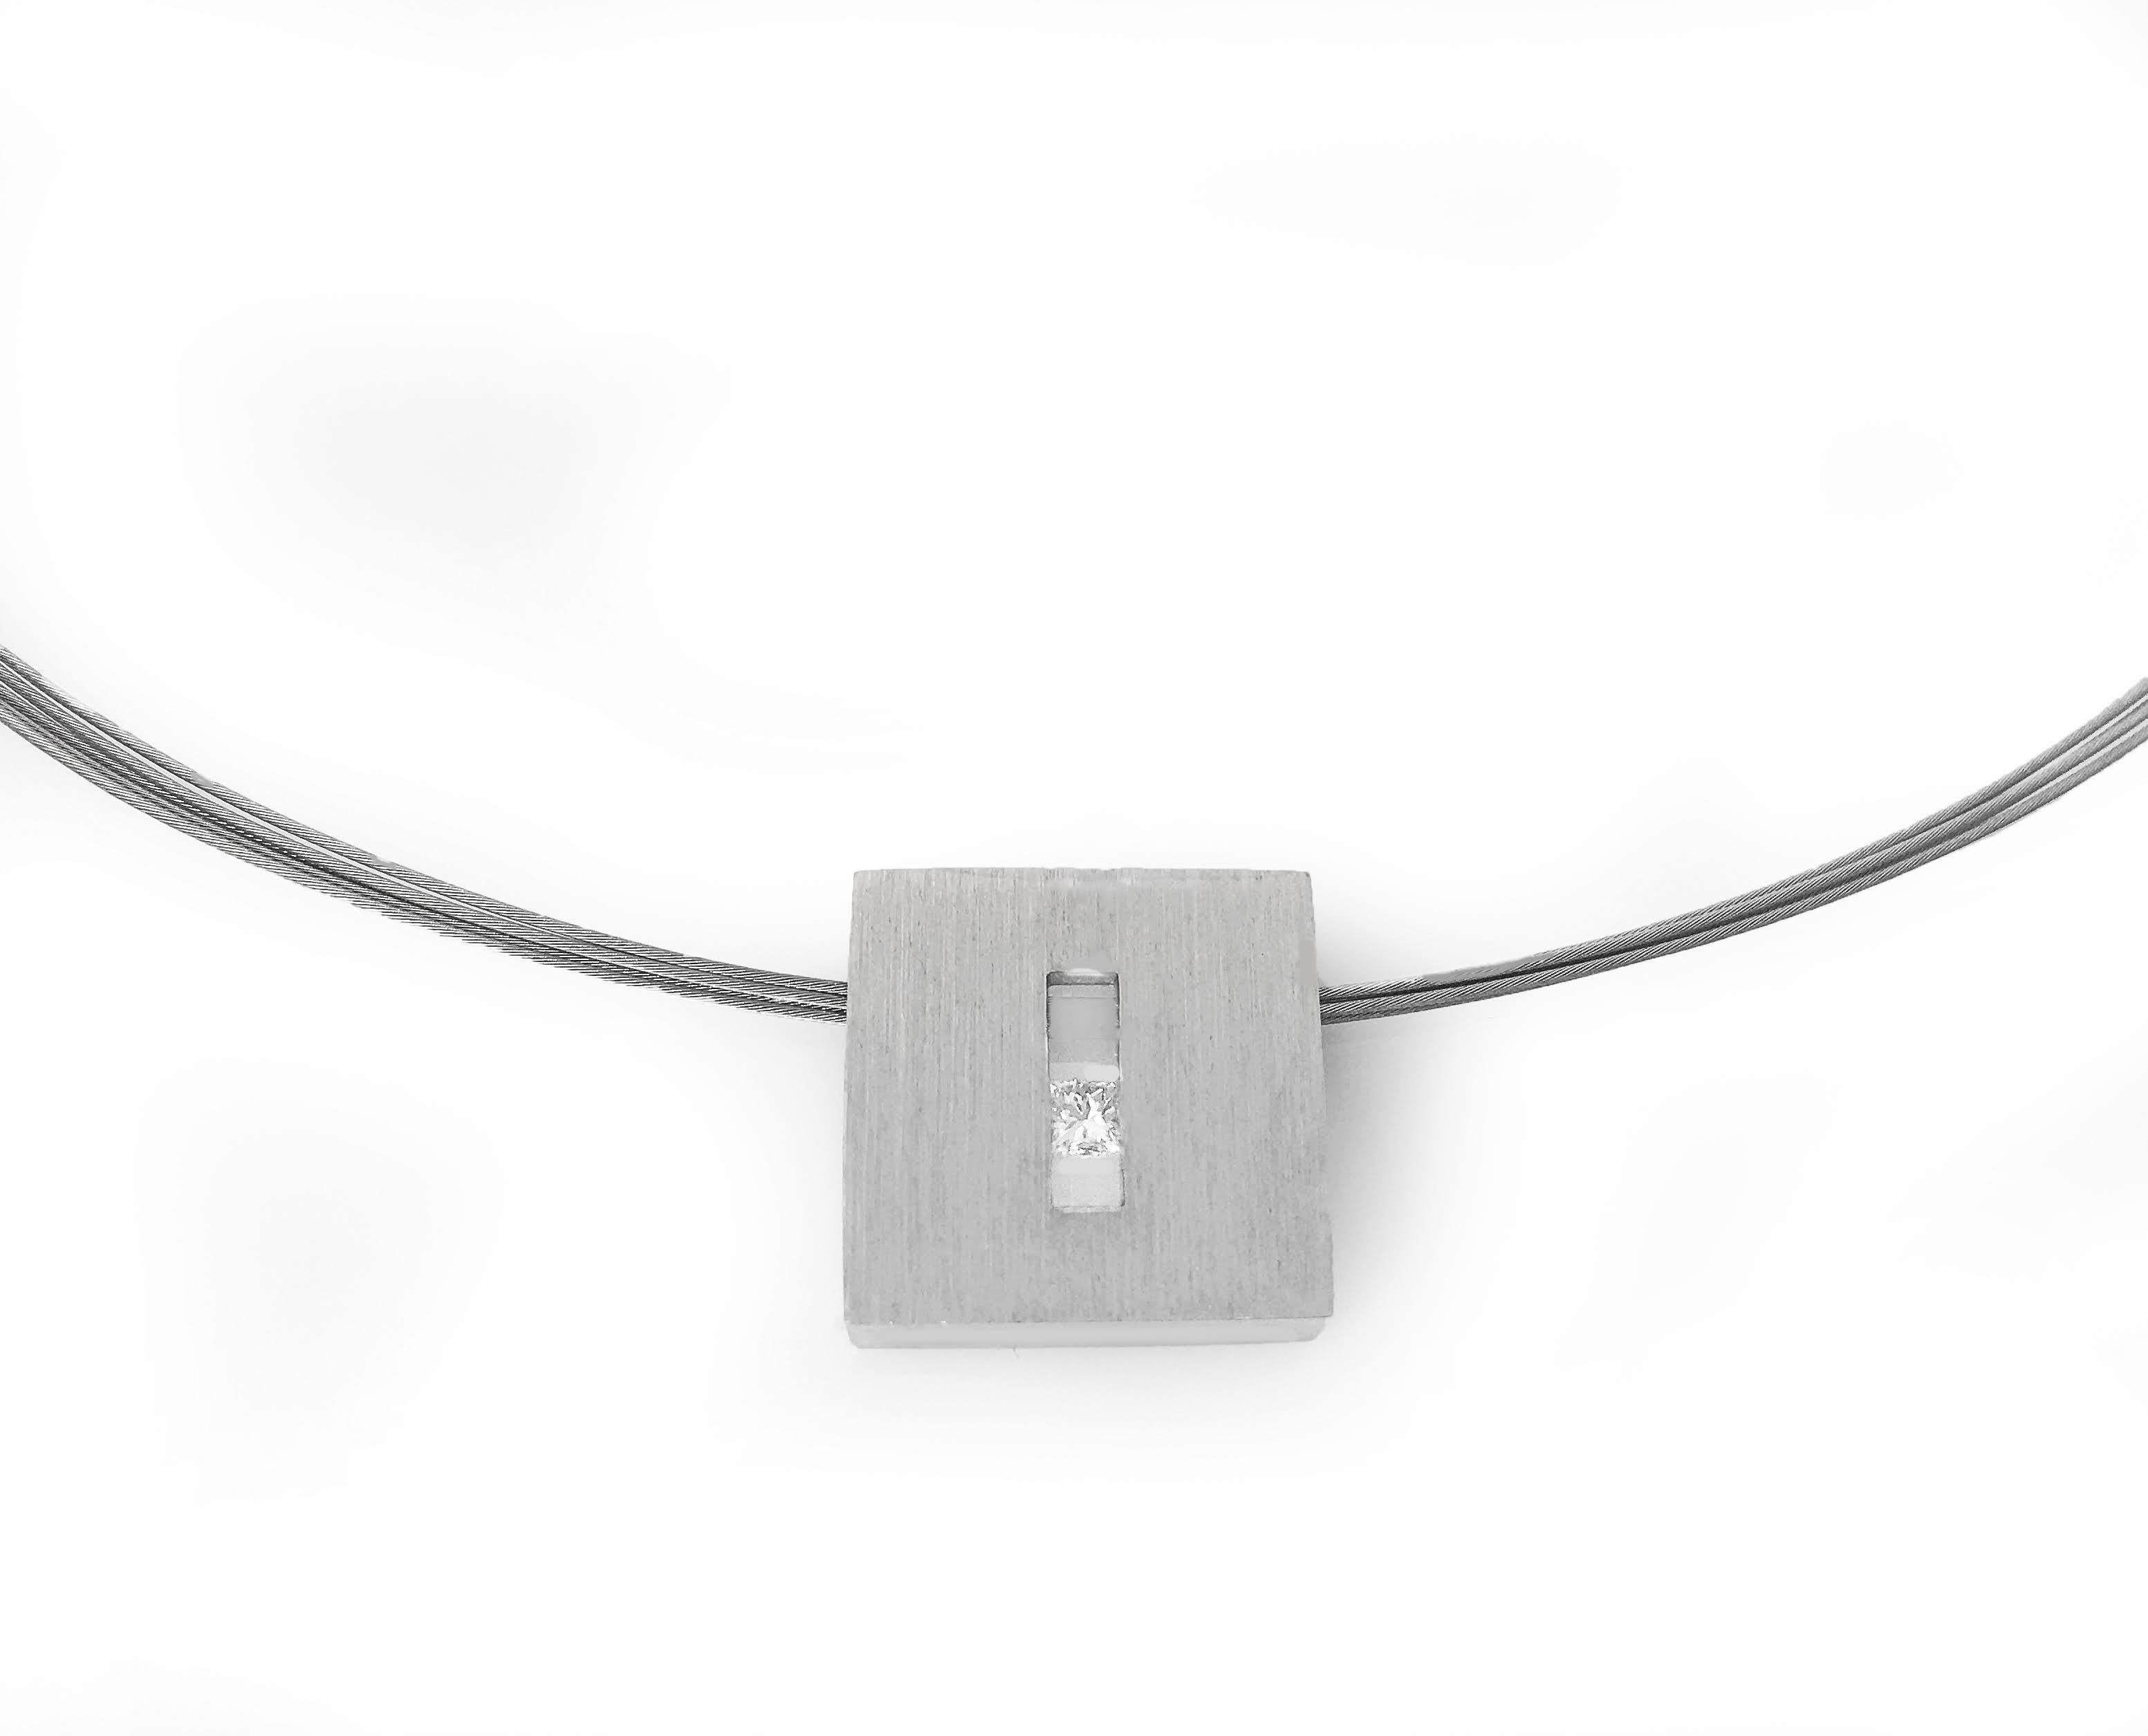 This Princess Diamond in White Gold Suspended Square Pendant is part of our Suspension Collection. Modern and architecturally inspired, this rectangle pendant is shown in white gold with a brushed finish and set off center with an approximately